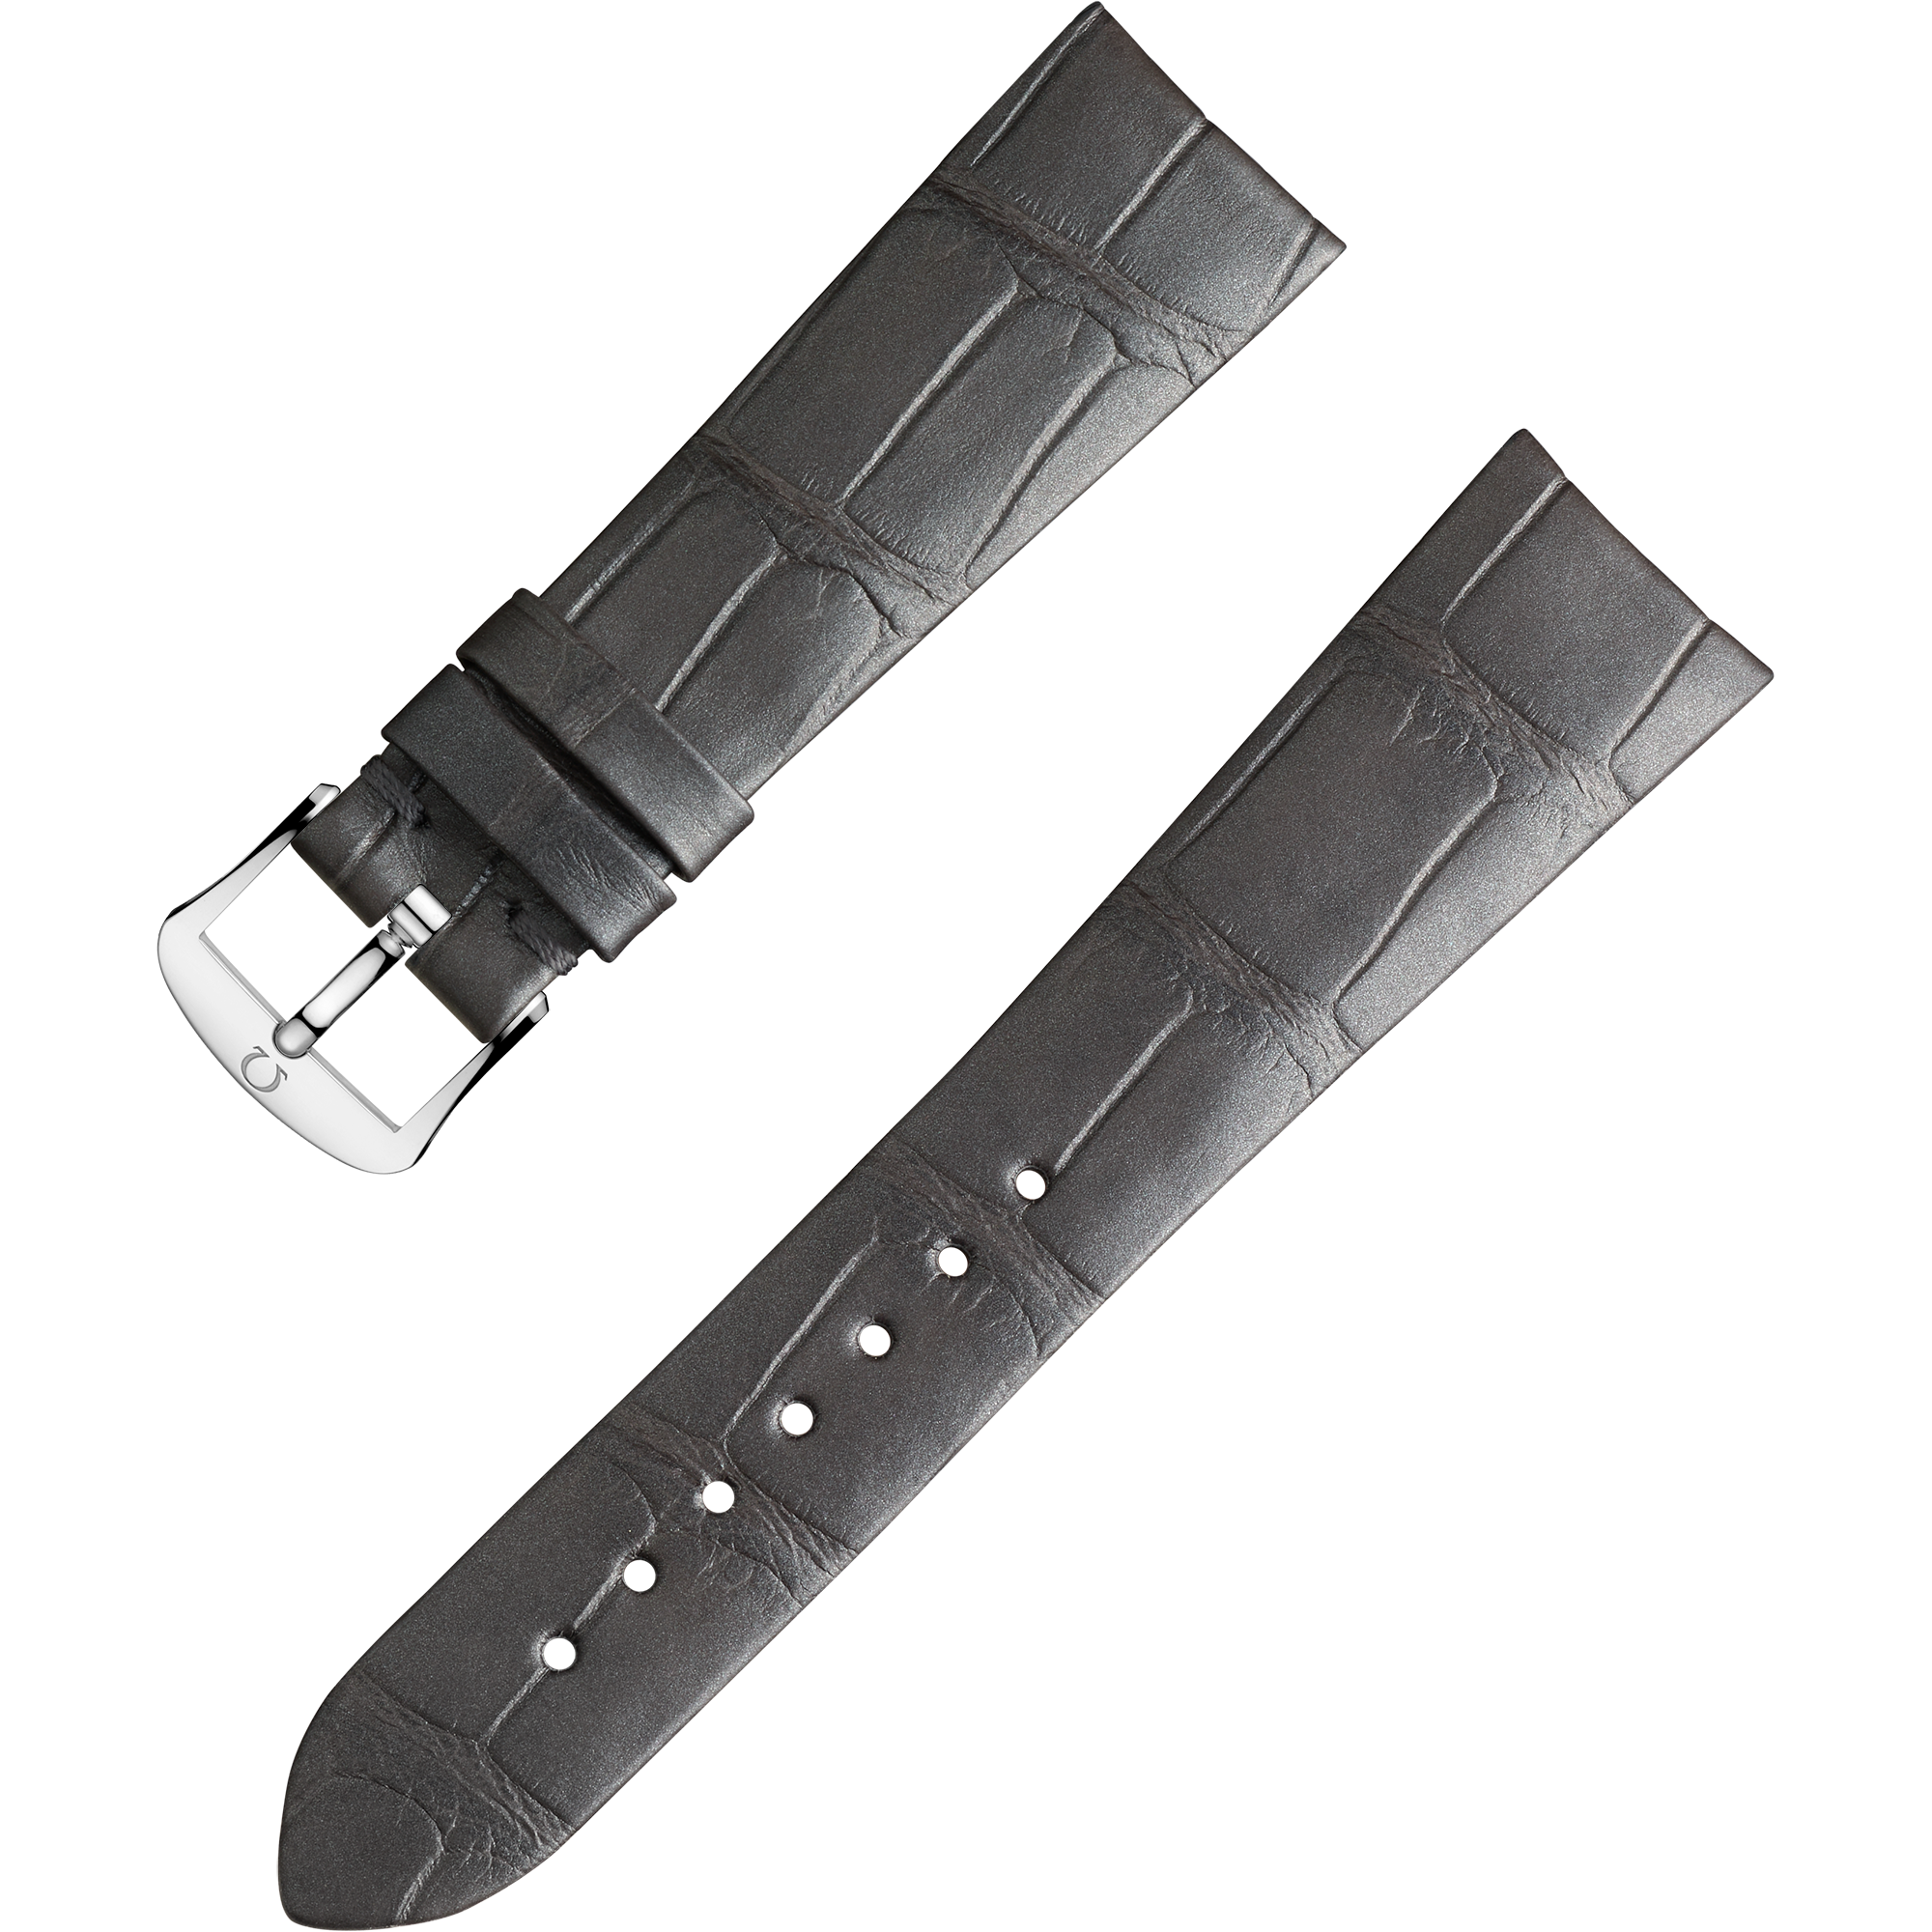 Two-piece strap - Grey alligator leather strap with pin buckle - 032CUZ009872